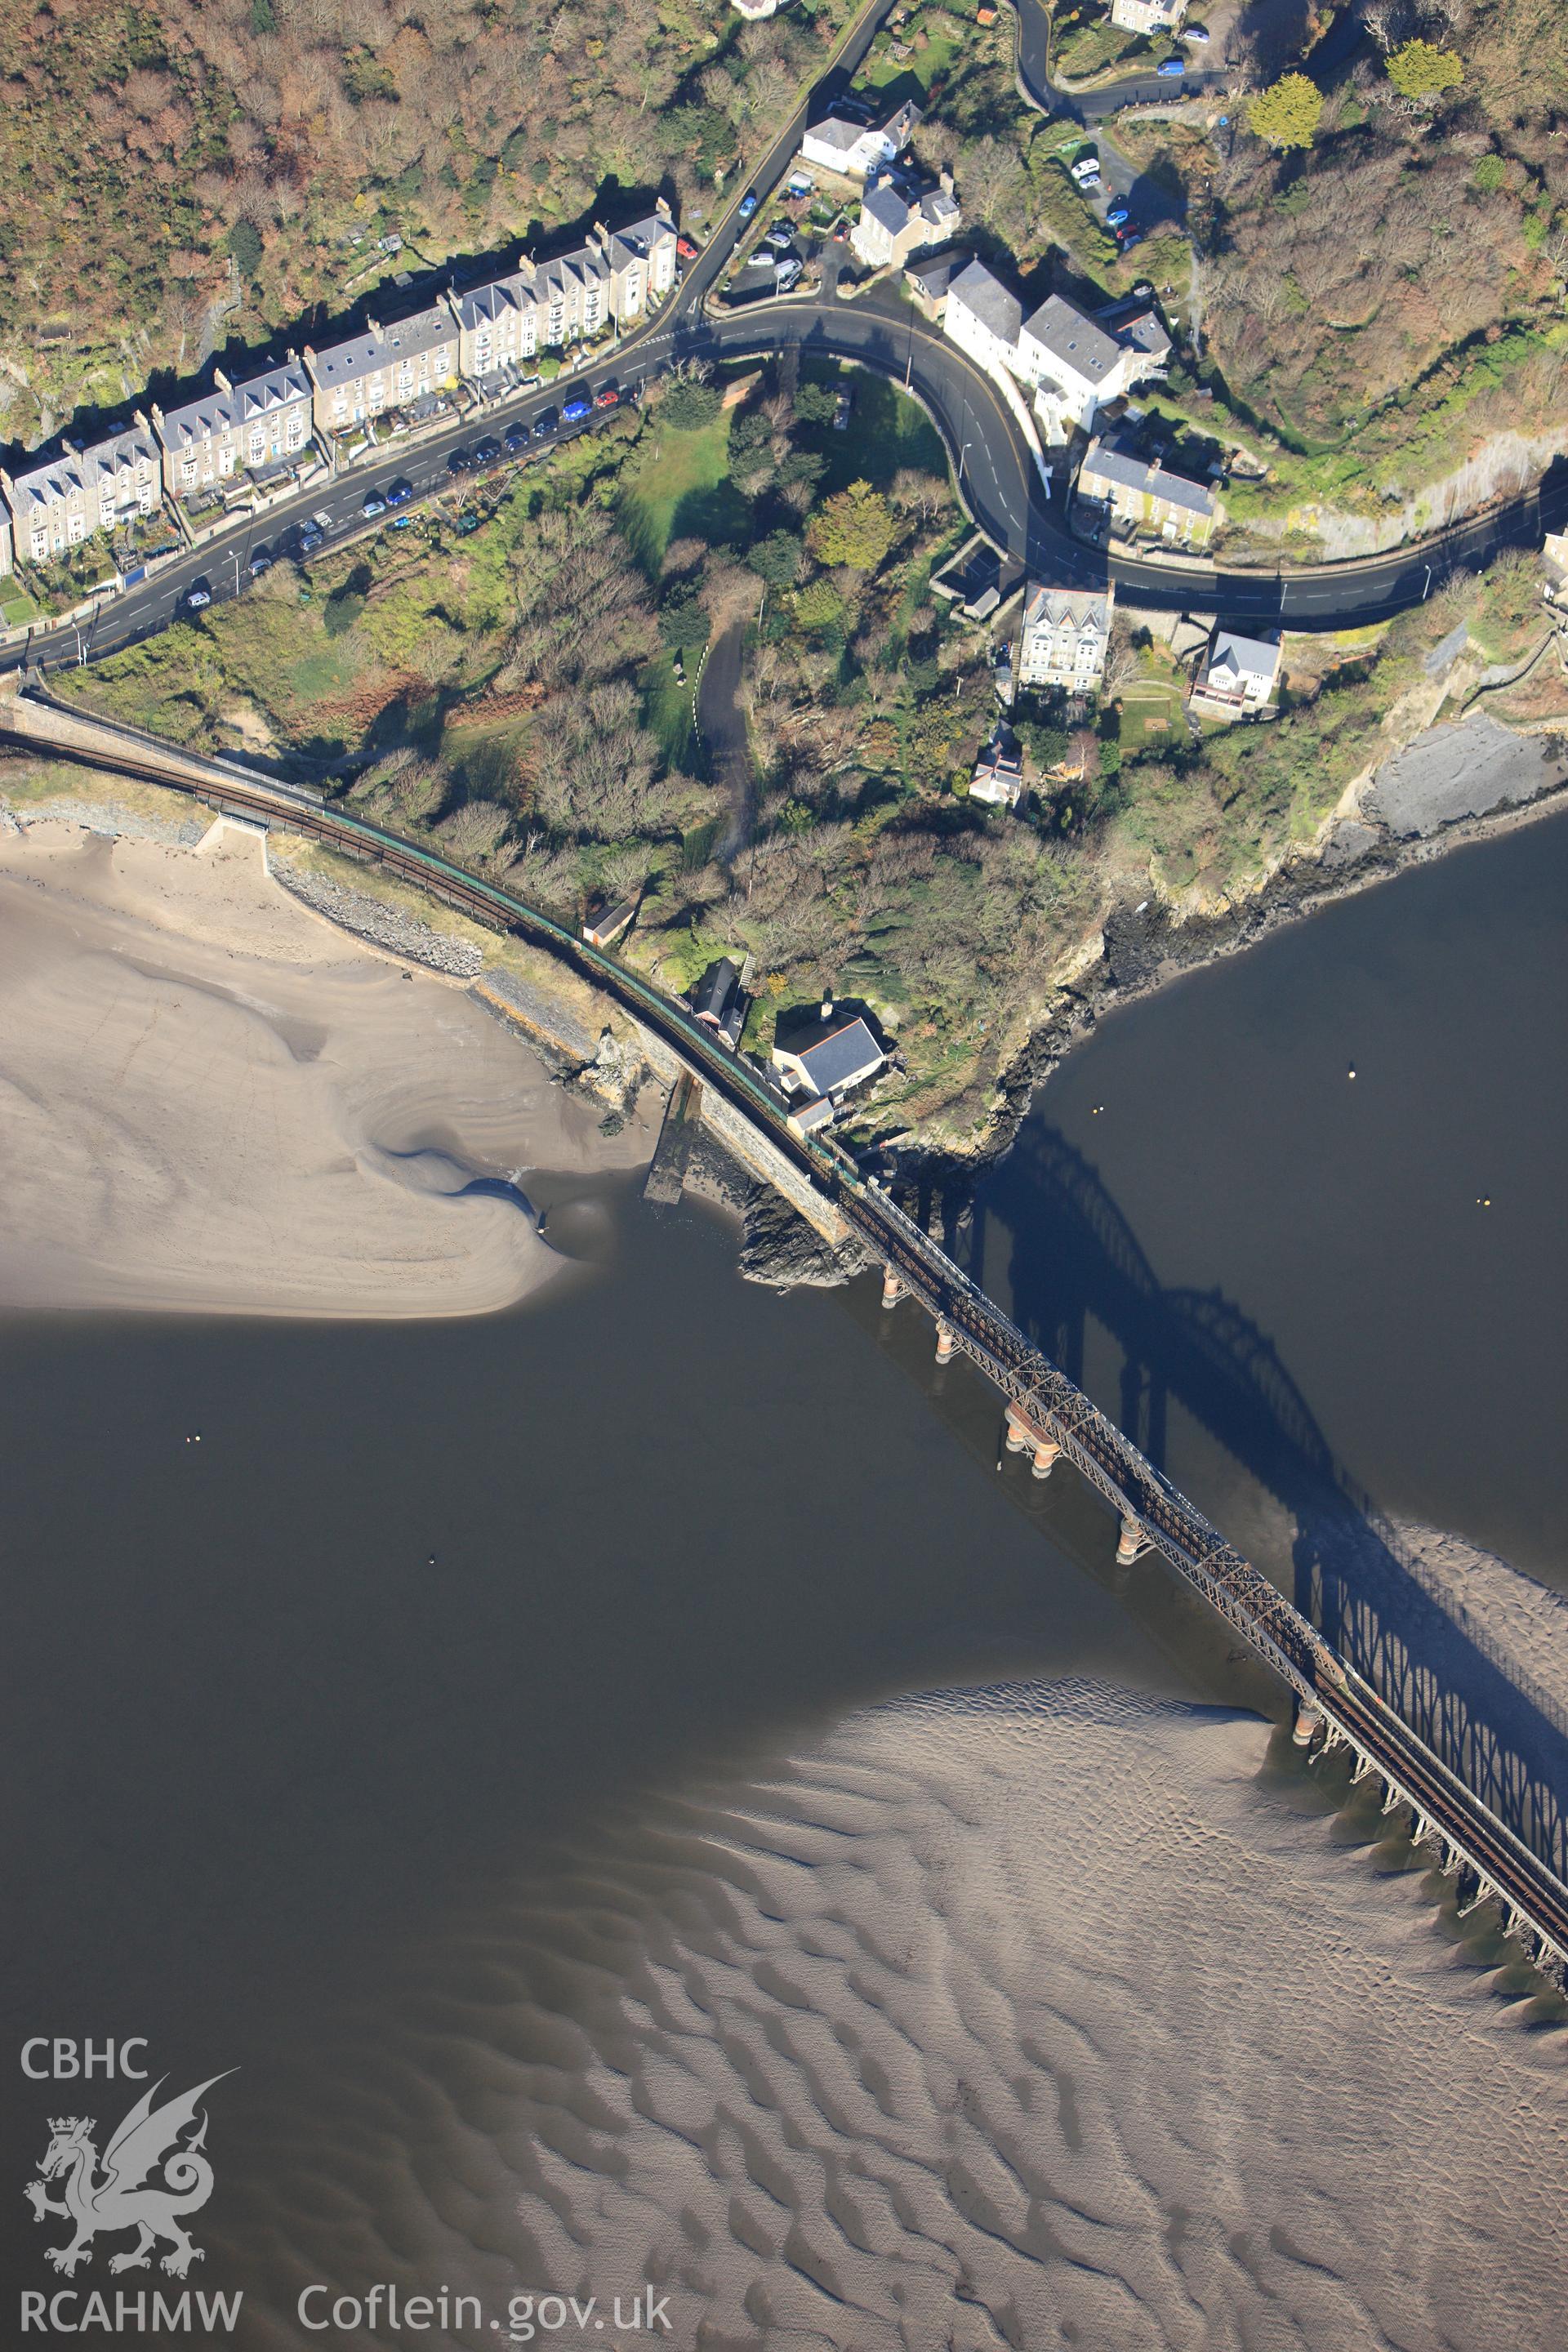 RCAHMW colour oblique photograph of Barmouth Railway Viaduct. Taken by Toby Driver on 10/12/2012.